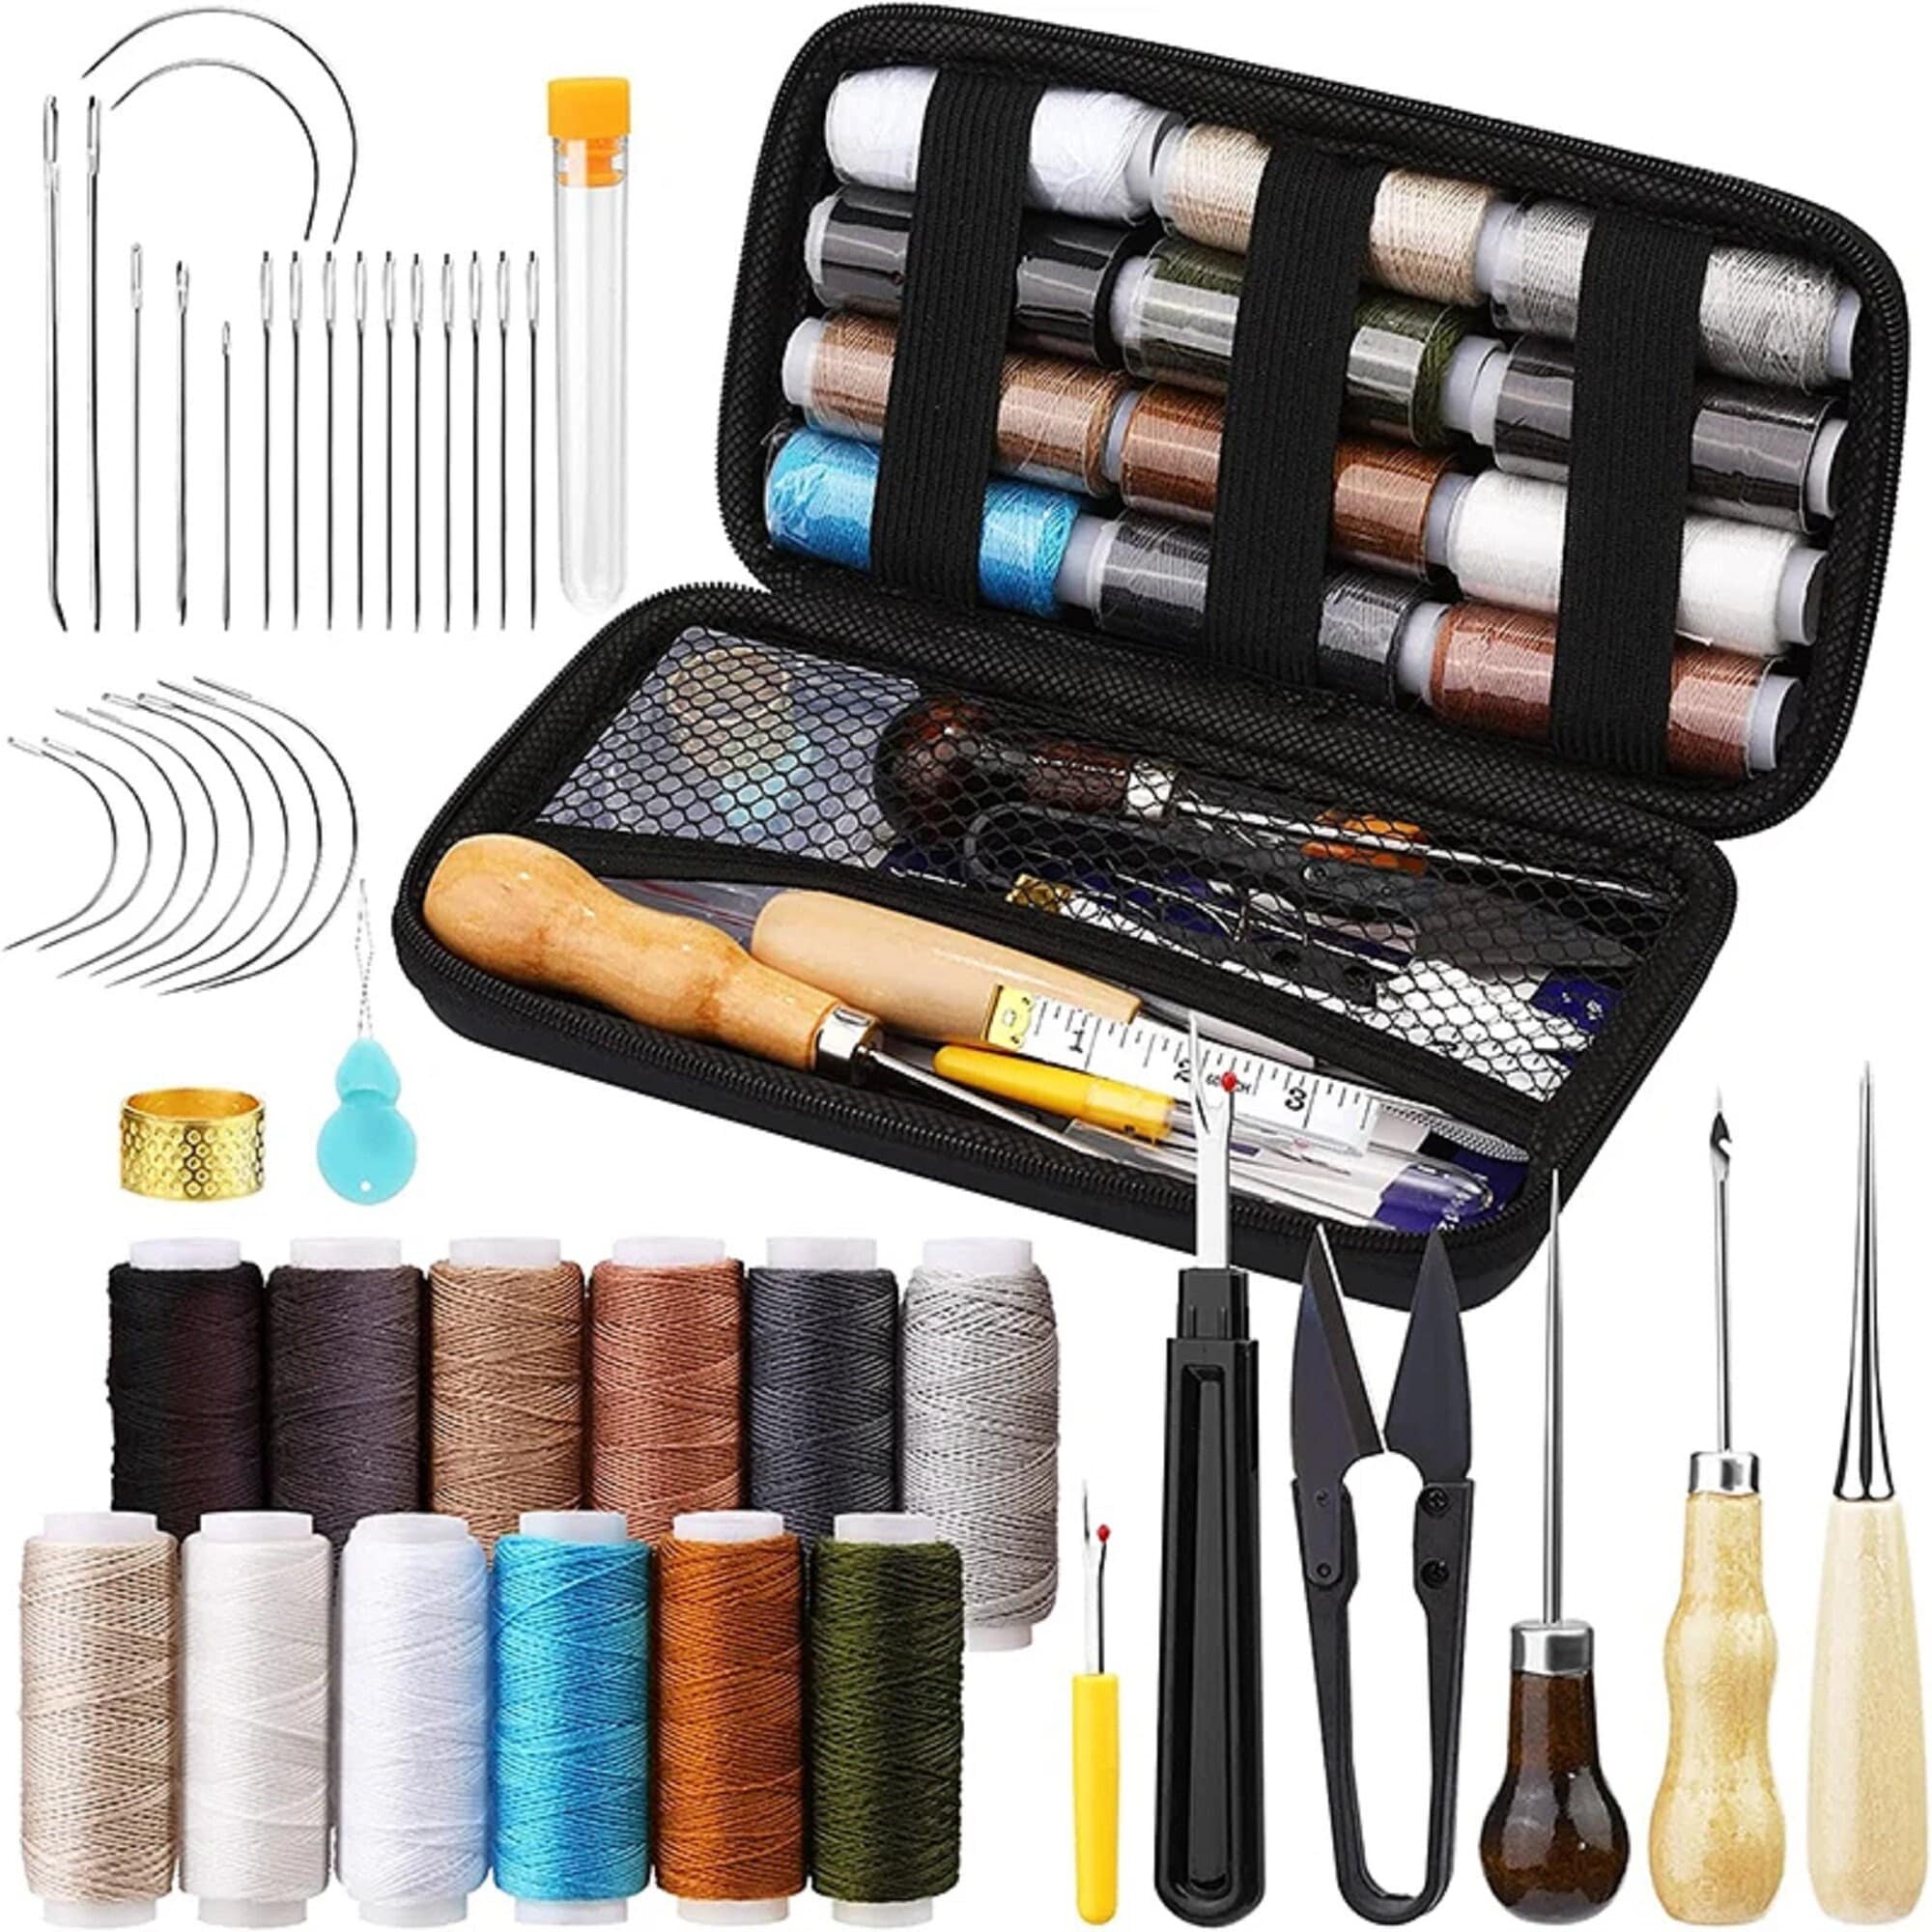 Sewing Kit Small Beginner Set W/multicolor Thread, Needles, Scissors,  Thimble & Clips Emergency Repair by Fablise Craft 